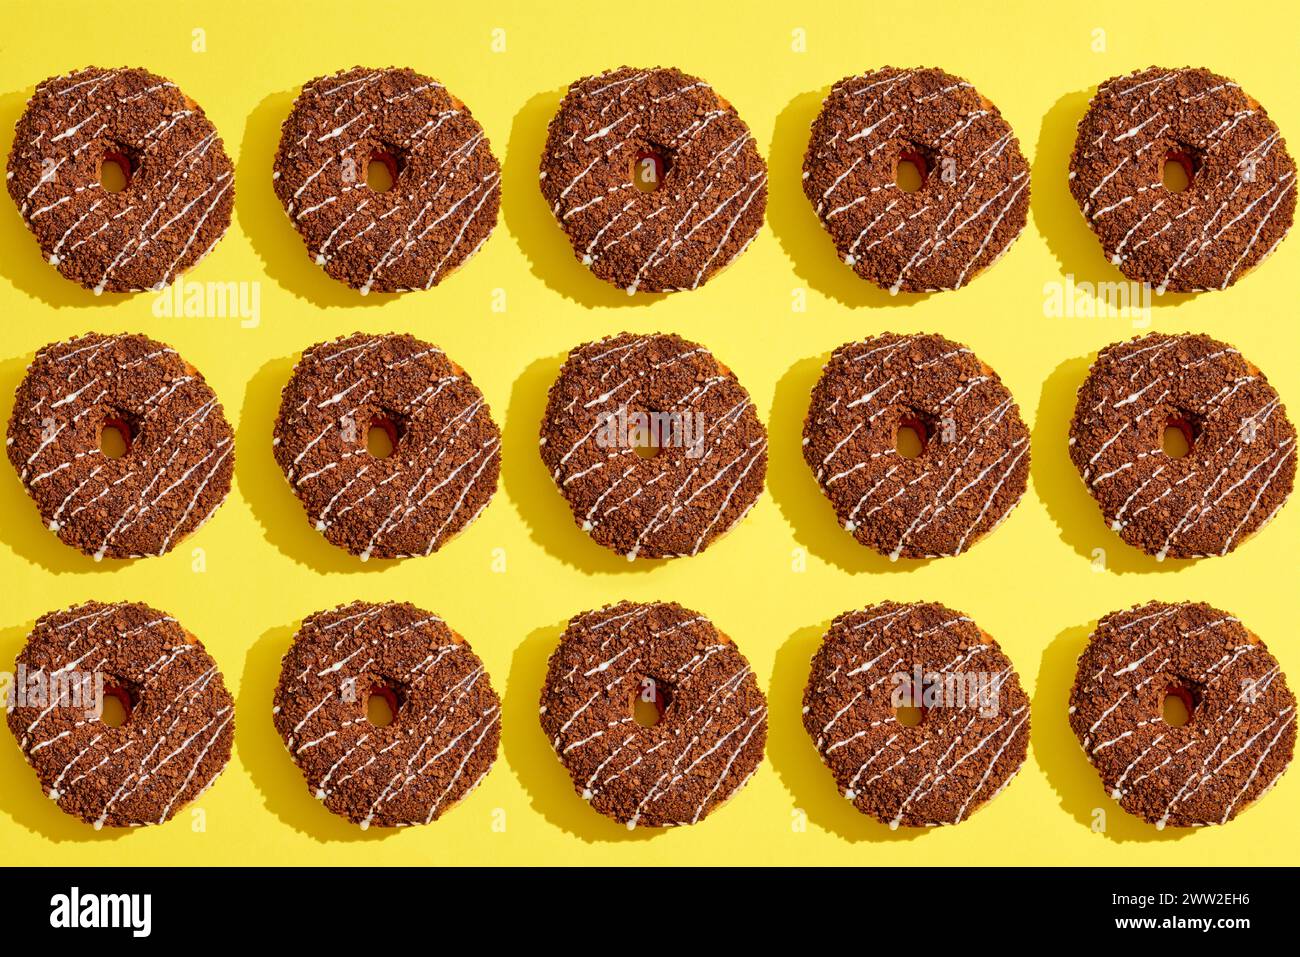 A pattern of donuts on a yellow background Stock Photo